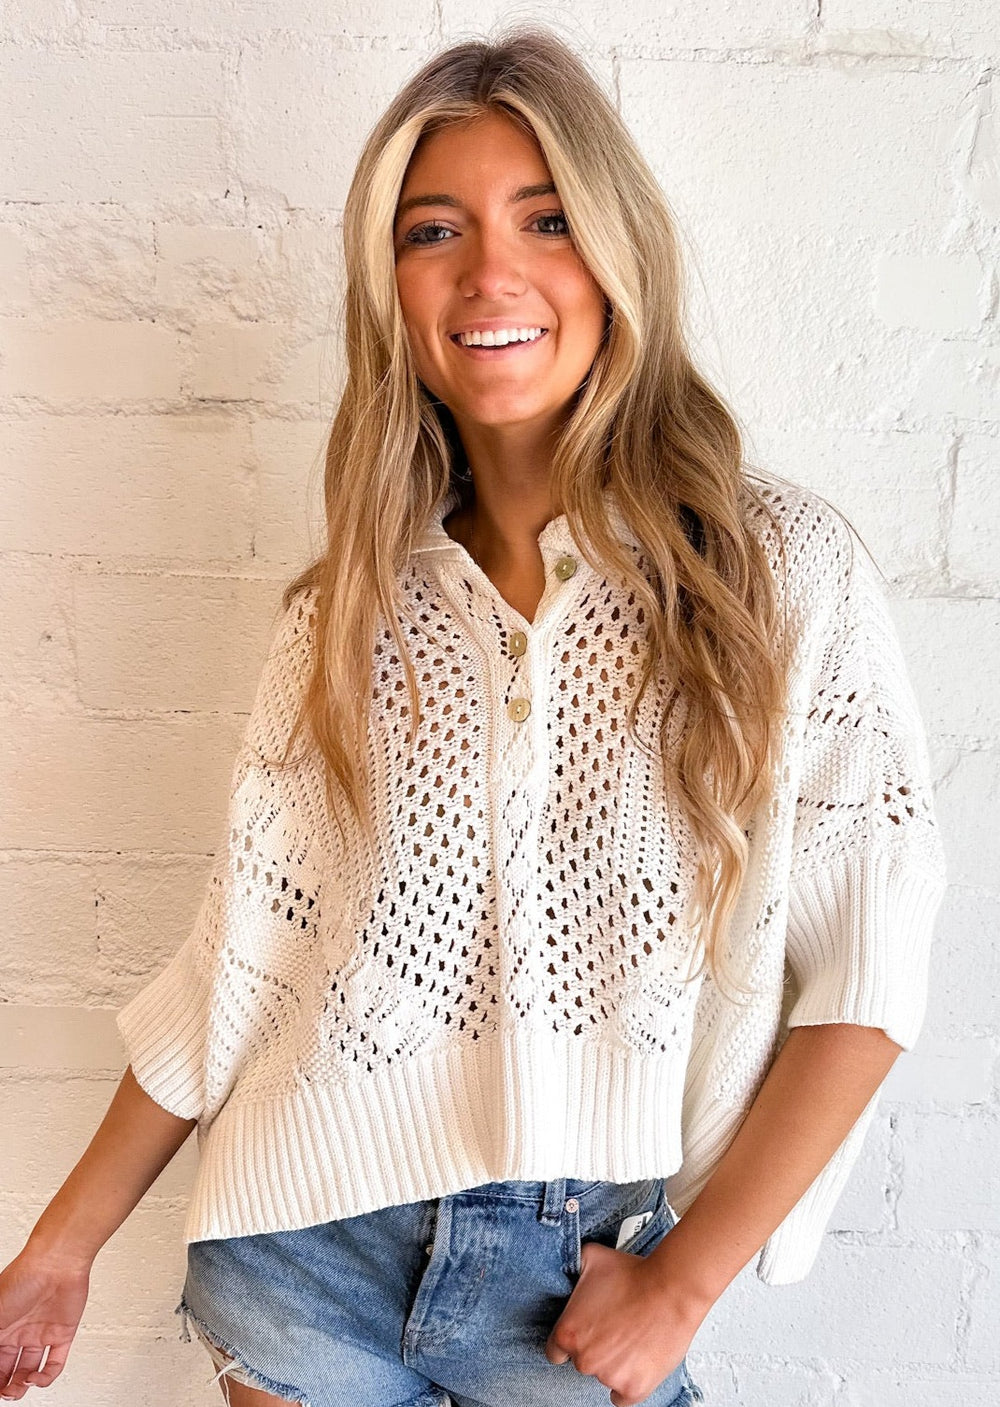 Free People To The Point Polo, Tops, Free People, Adeline, dallas boutique, dallas texas, texas boutique, women's boutique dallas, adeline boutique, dallas boutique, trendy boutique, affordable boutique